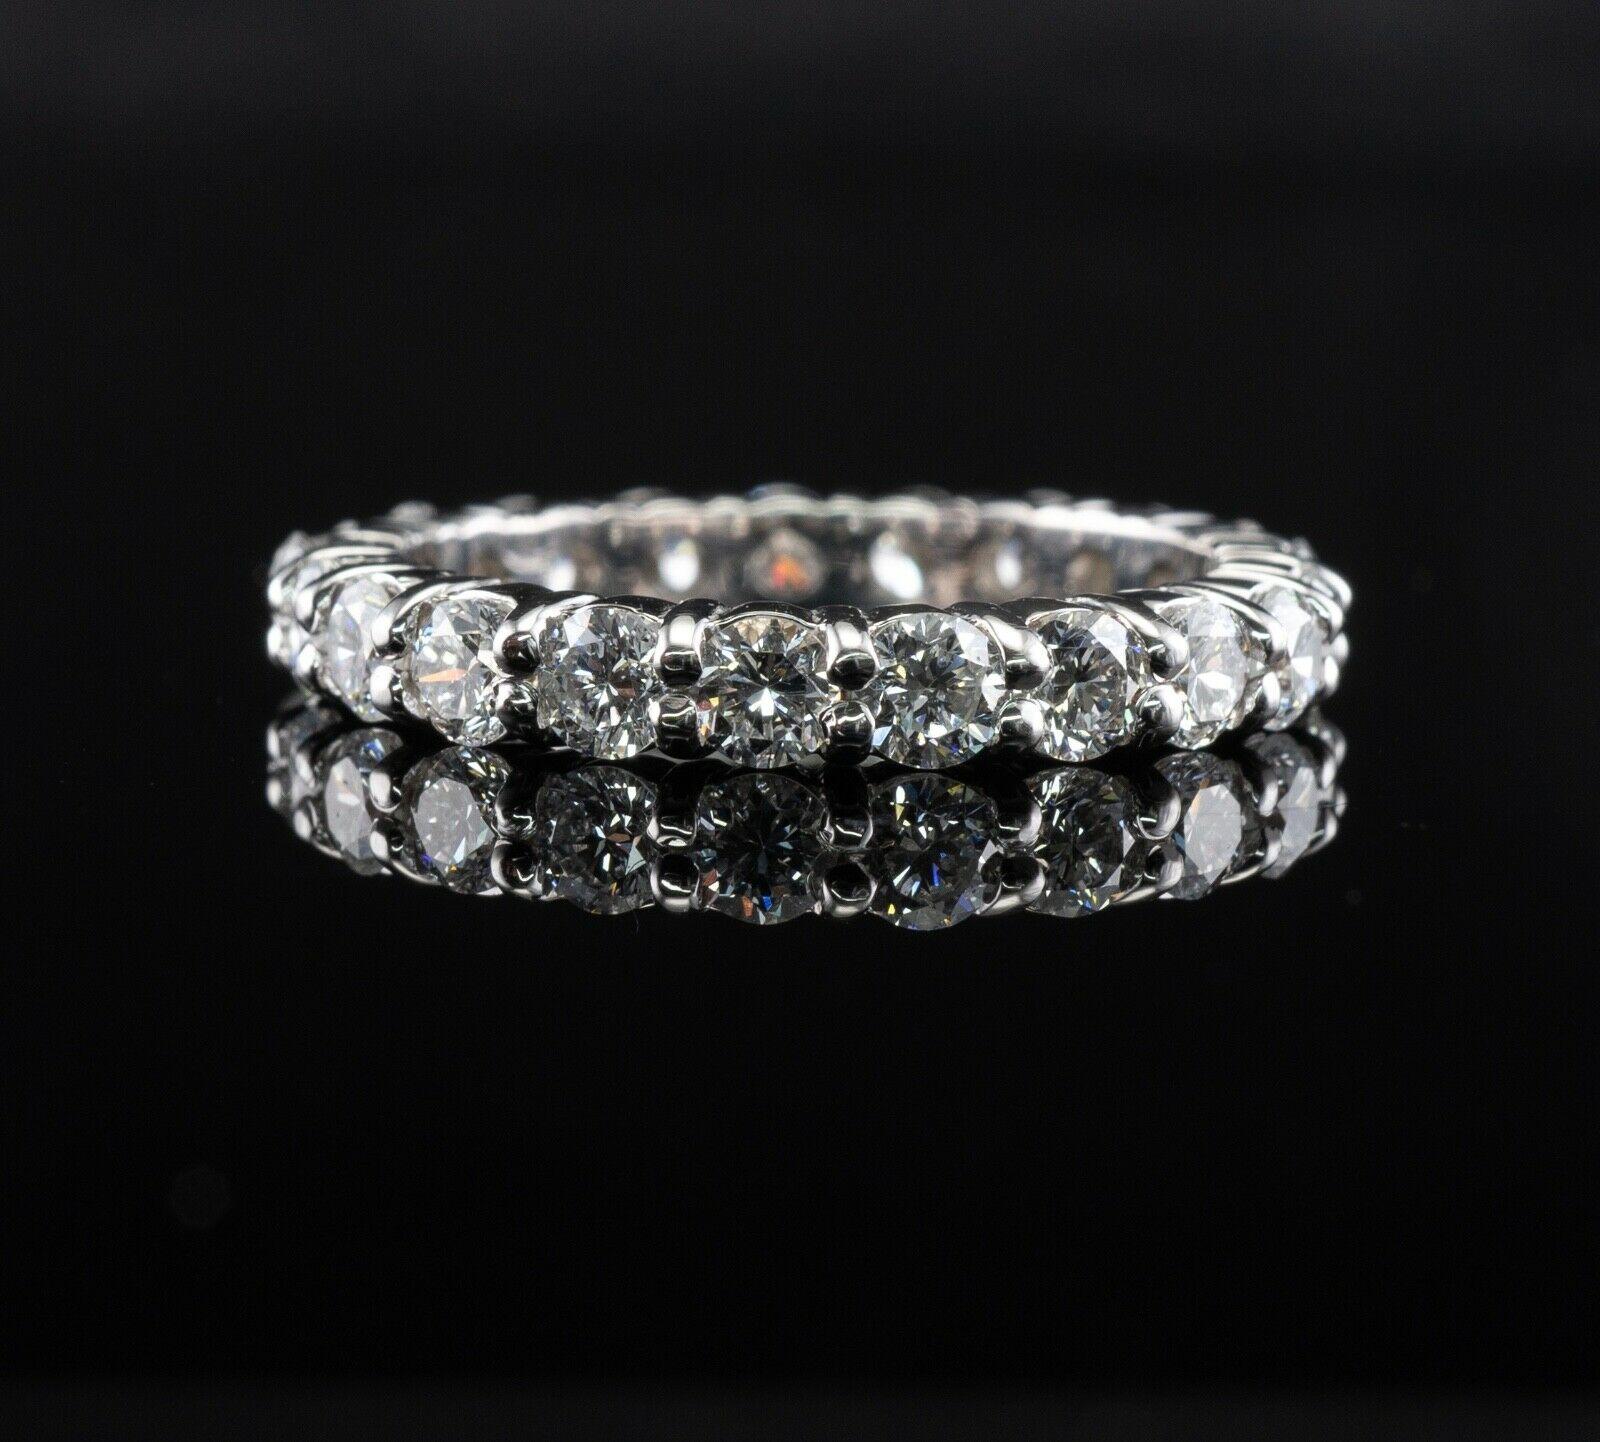 Diamond Eternity Ring Band 14K White Gold 2.10 TDW sz. 6.5

This gorgeous estate ring is finely crafted in solid 14K White gold (carefully tested and guaranteed). Twenty one round brilliant cut diamonds all go around, no beginning, no end. These